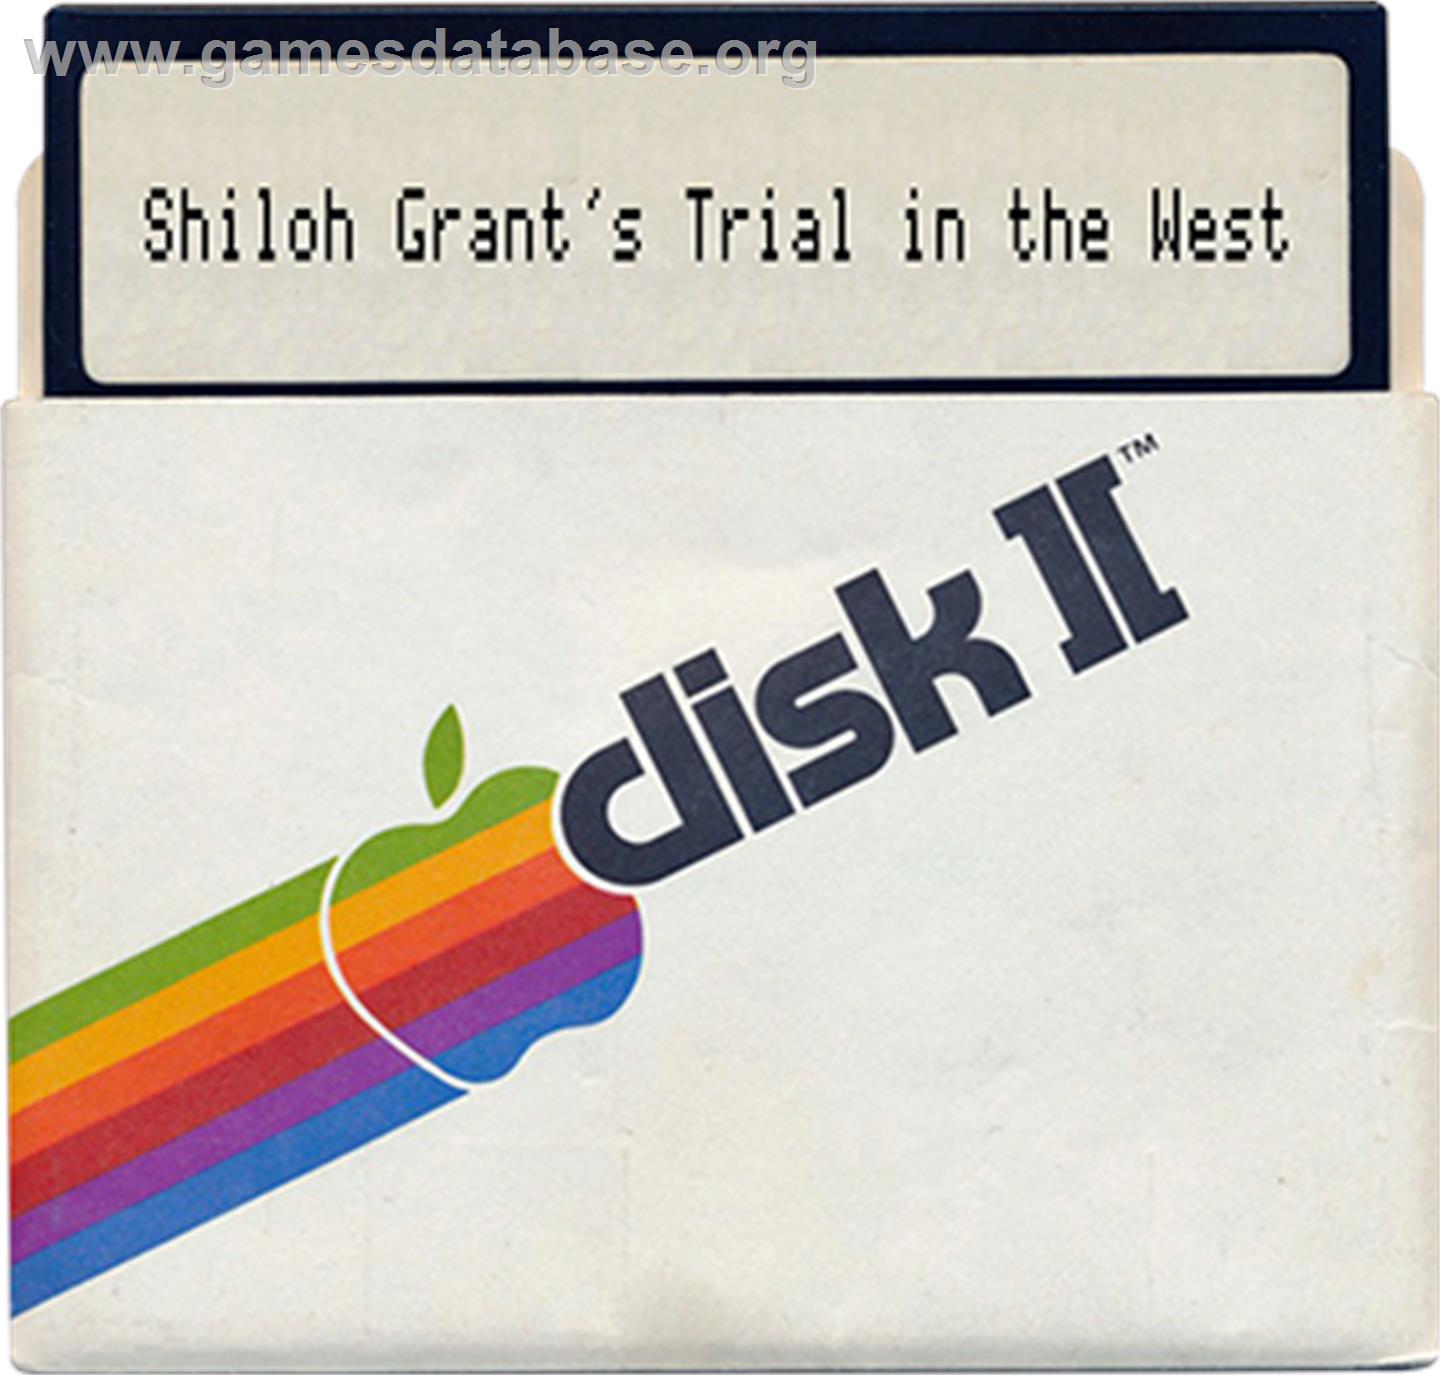 Shiloh: Grant's Trial in the West - Apple II - Artwork - Disc